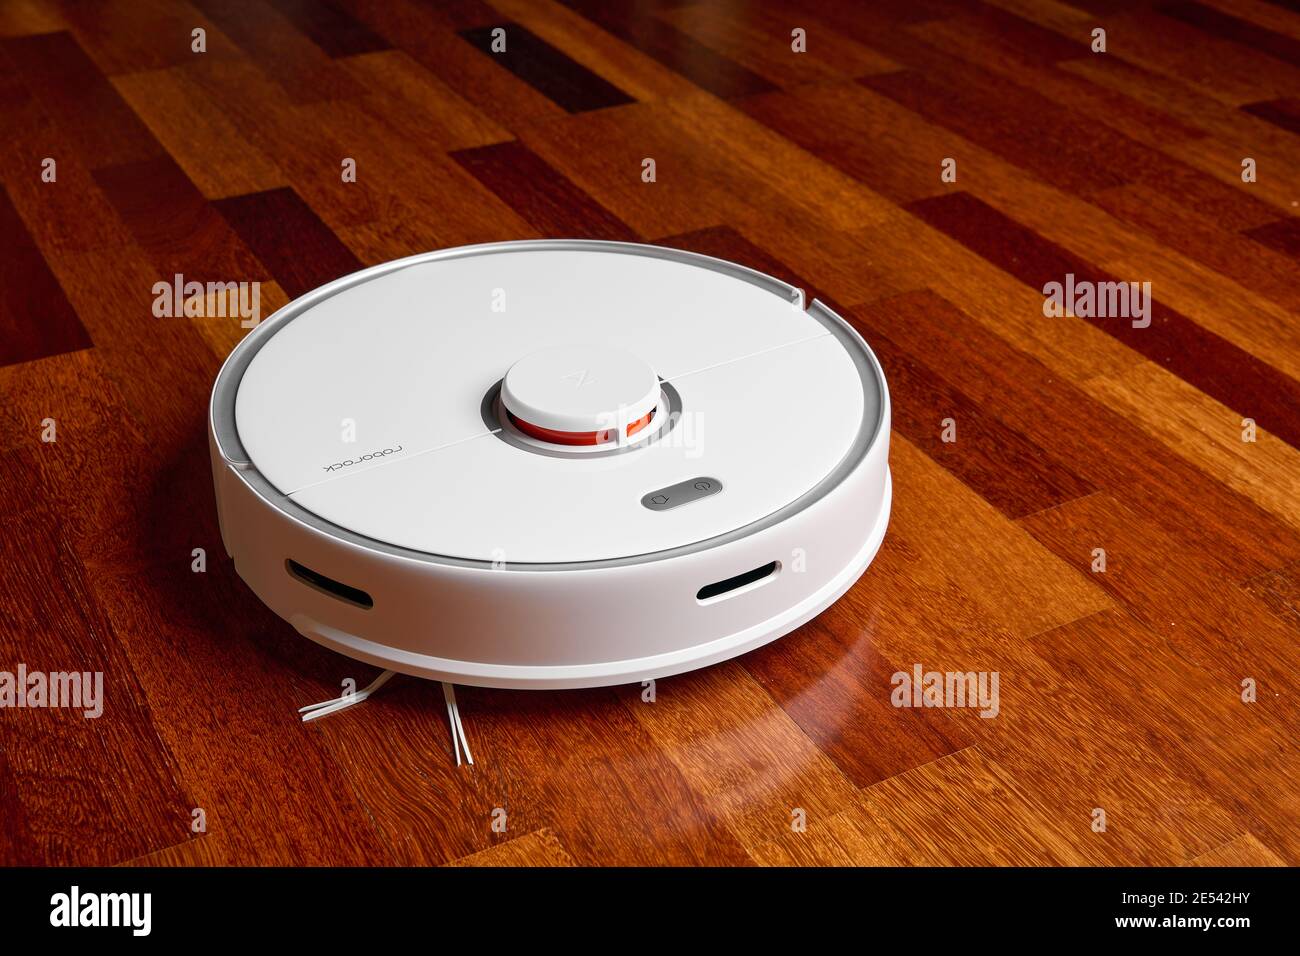 Smart Robot Vacuum Cleaner Xiaomi roborock s5 max on wood floor. Robot vacuum cleaner performs automatic cleaning of the apartment. 04.12.2020, Rostov Stock Photo